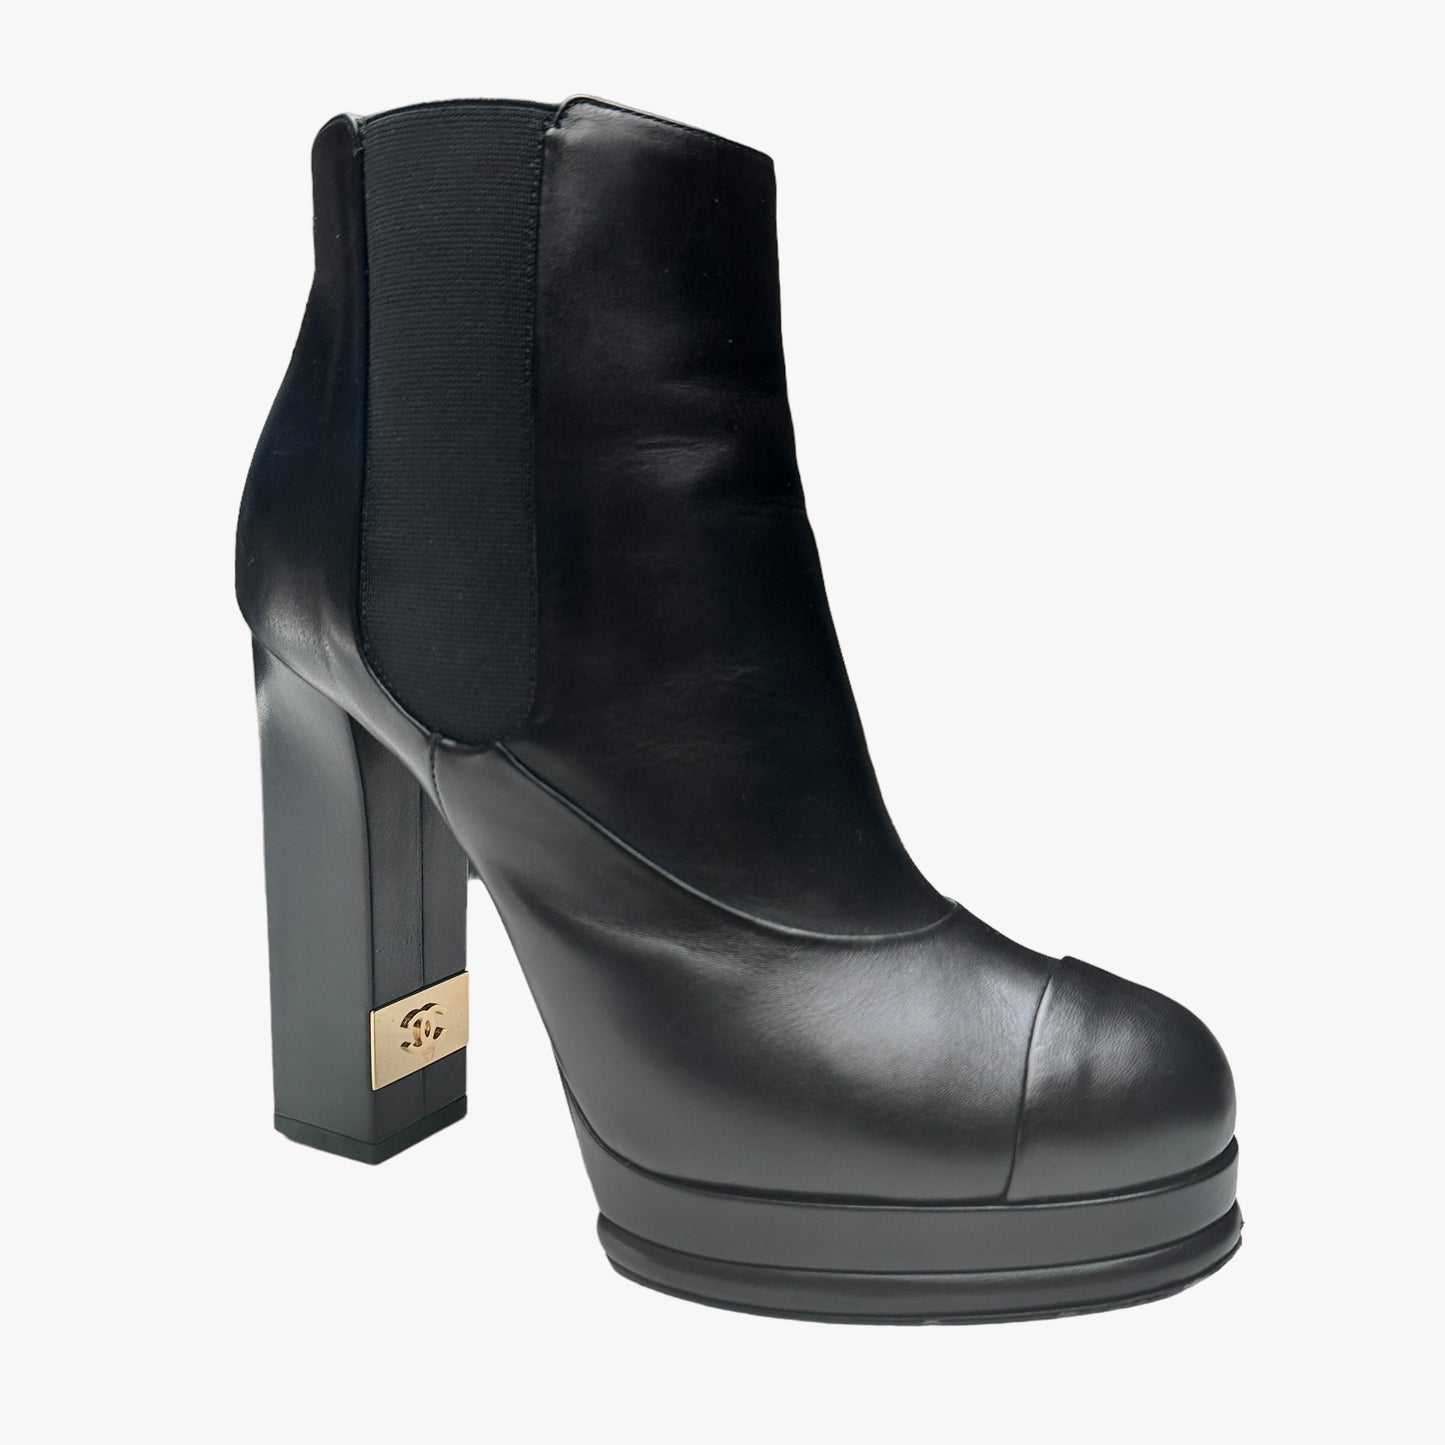 Black Leather Boots w/Logo - 8.5